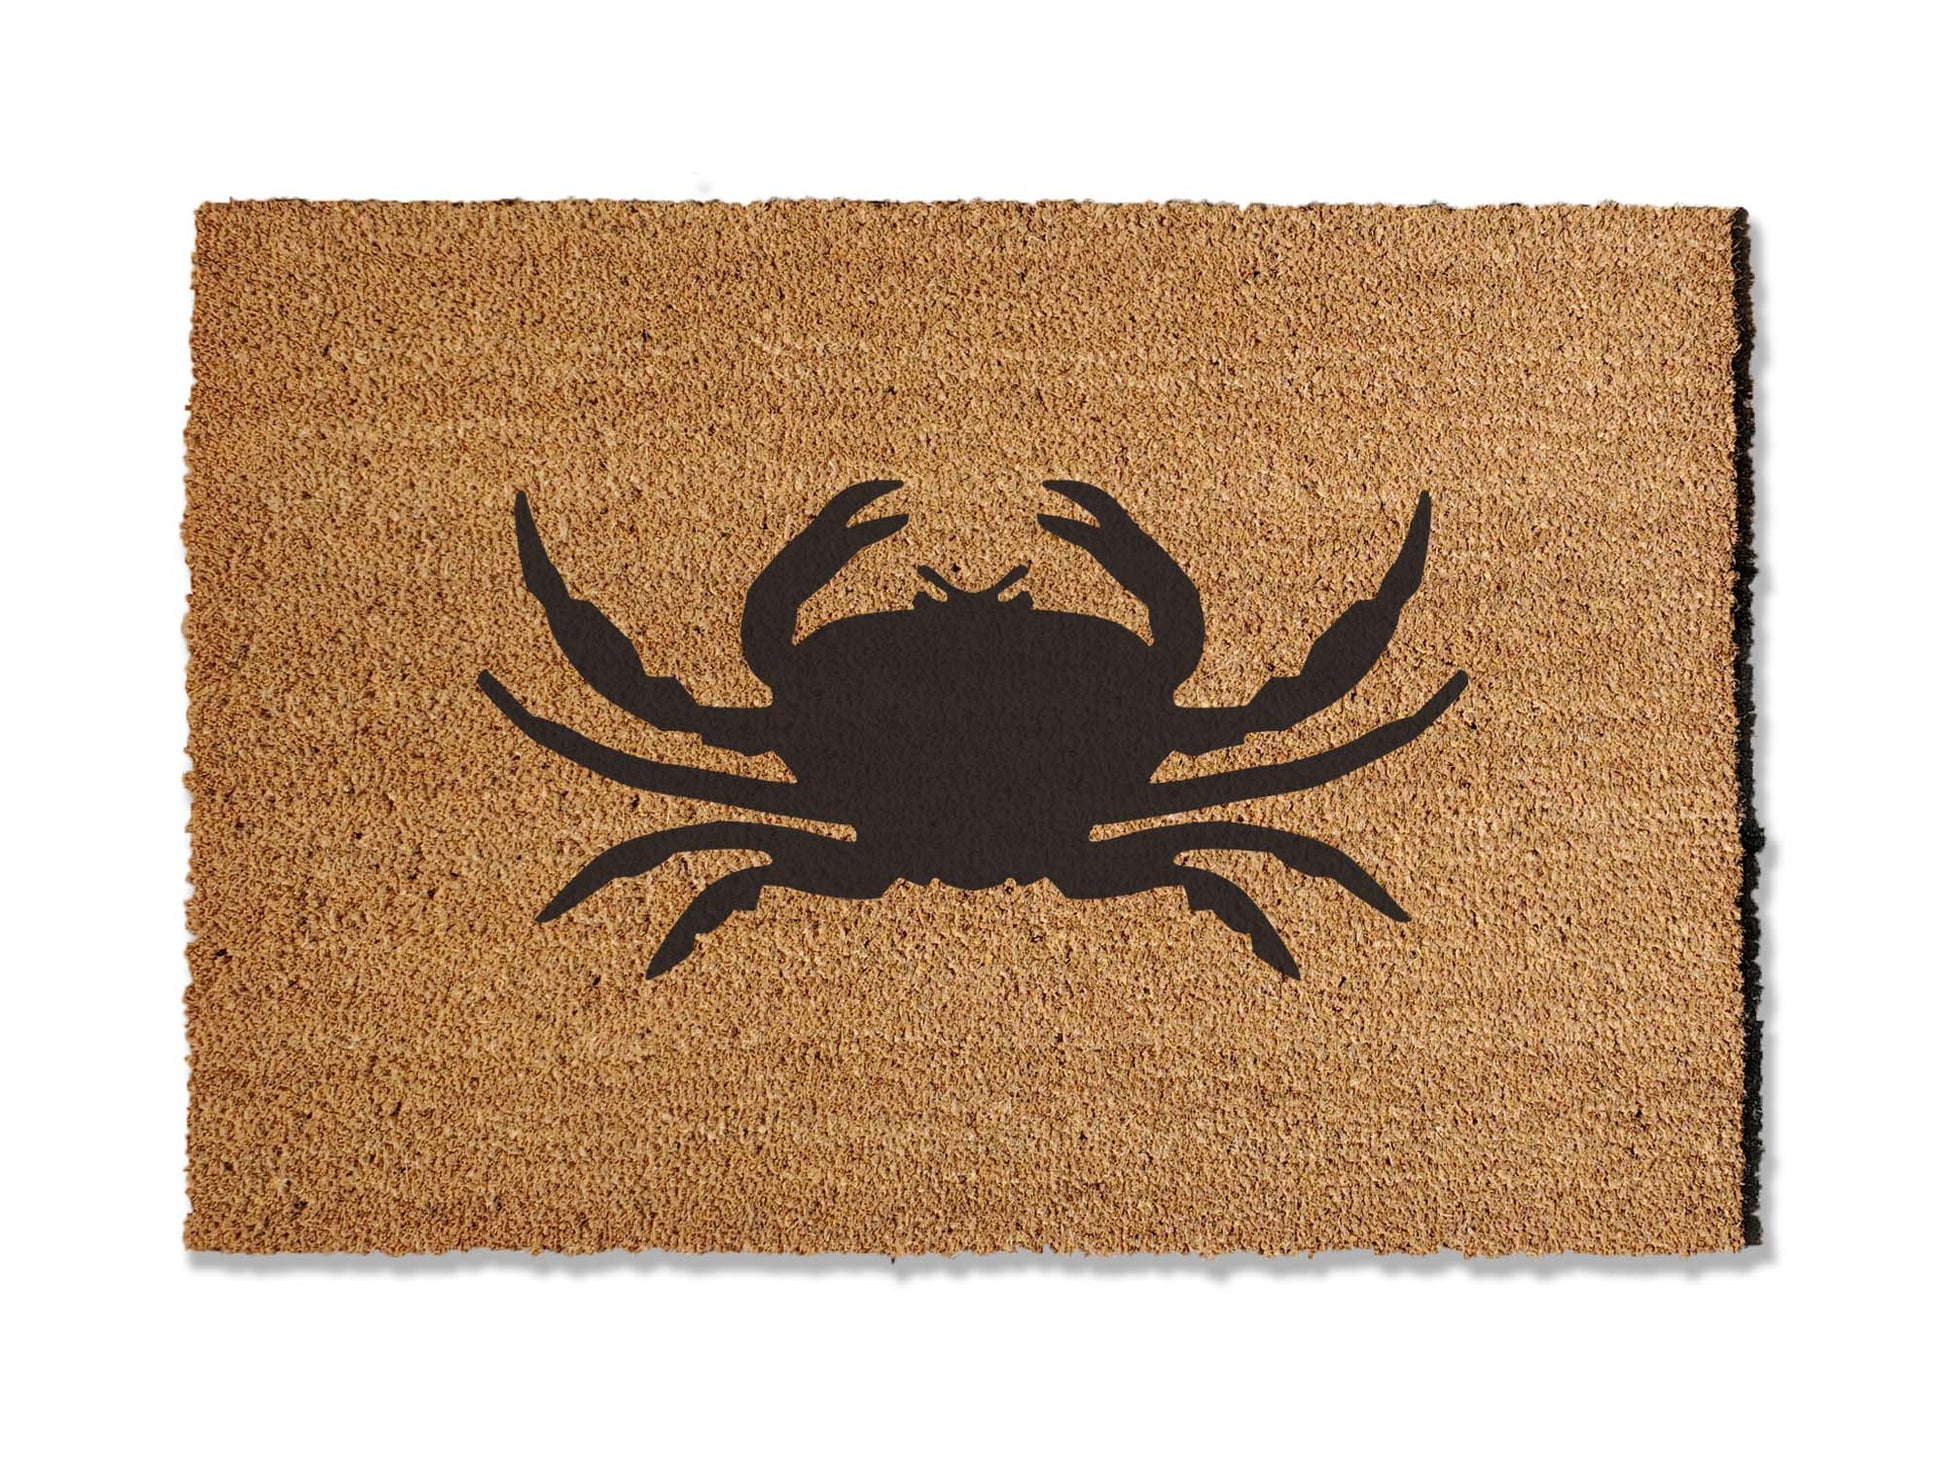 Transform your entryway with our versatile coir welcome doormat adorned with a crab design. Available in multiple sizes, this coastal-inspired mat is a perfect addition to your beach house, bringing a touch of seaside charm that spruces up your home's entrance.